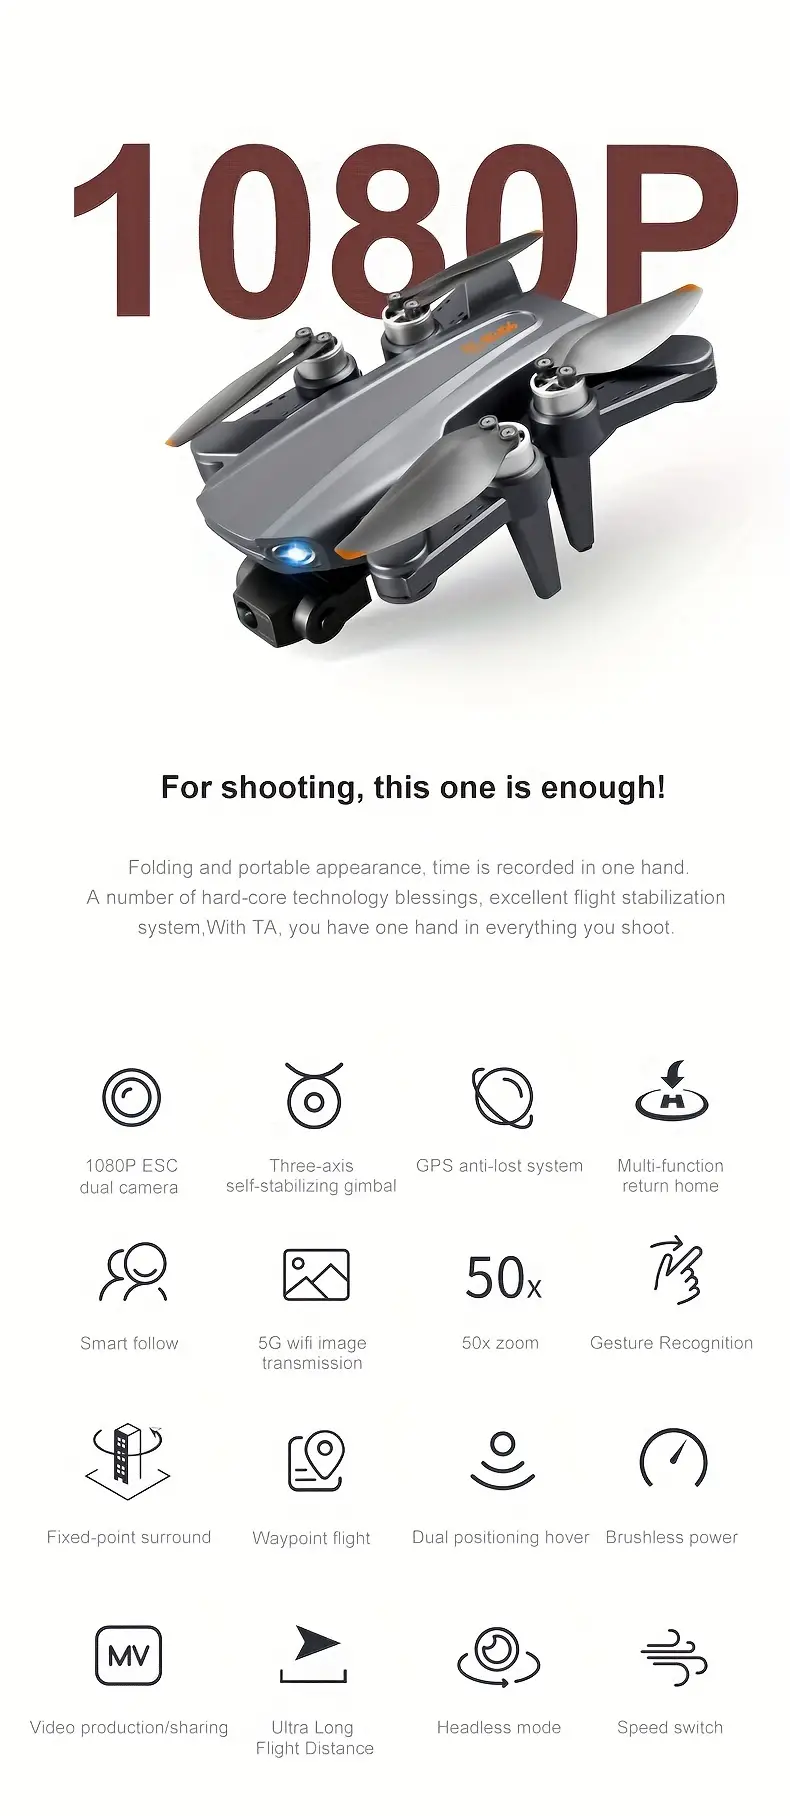 rg106 three axis self stabilizing gimbal with two batteries professional aerial drone 1080p dual camera gps positioning auto return optical flow positioning brushless motor hd image transmission foldable quadcopter with storage backpack beautiful color box christmas thanksgiving halloween gift details 1